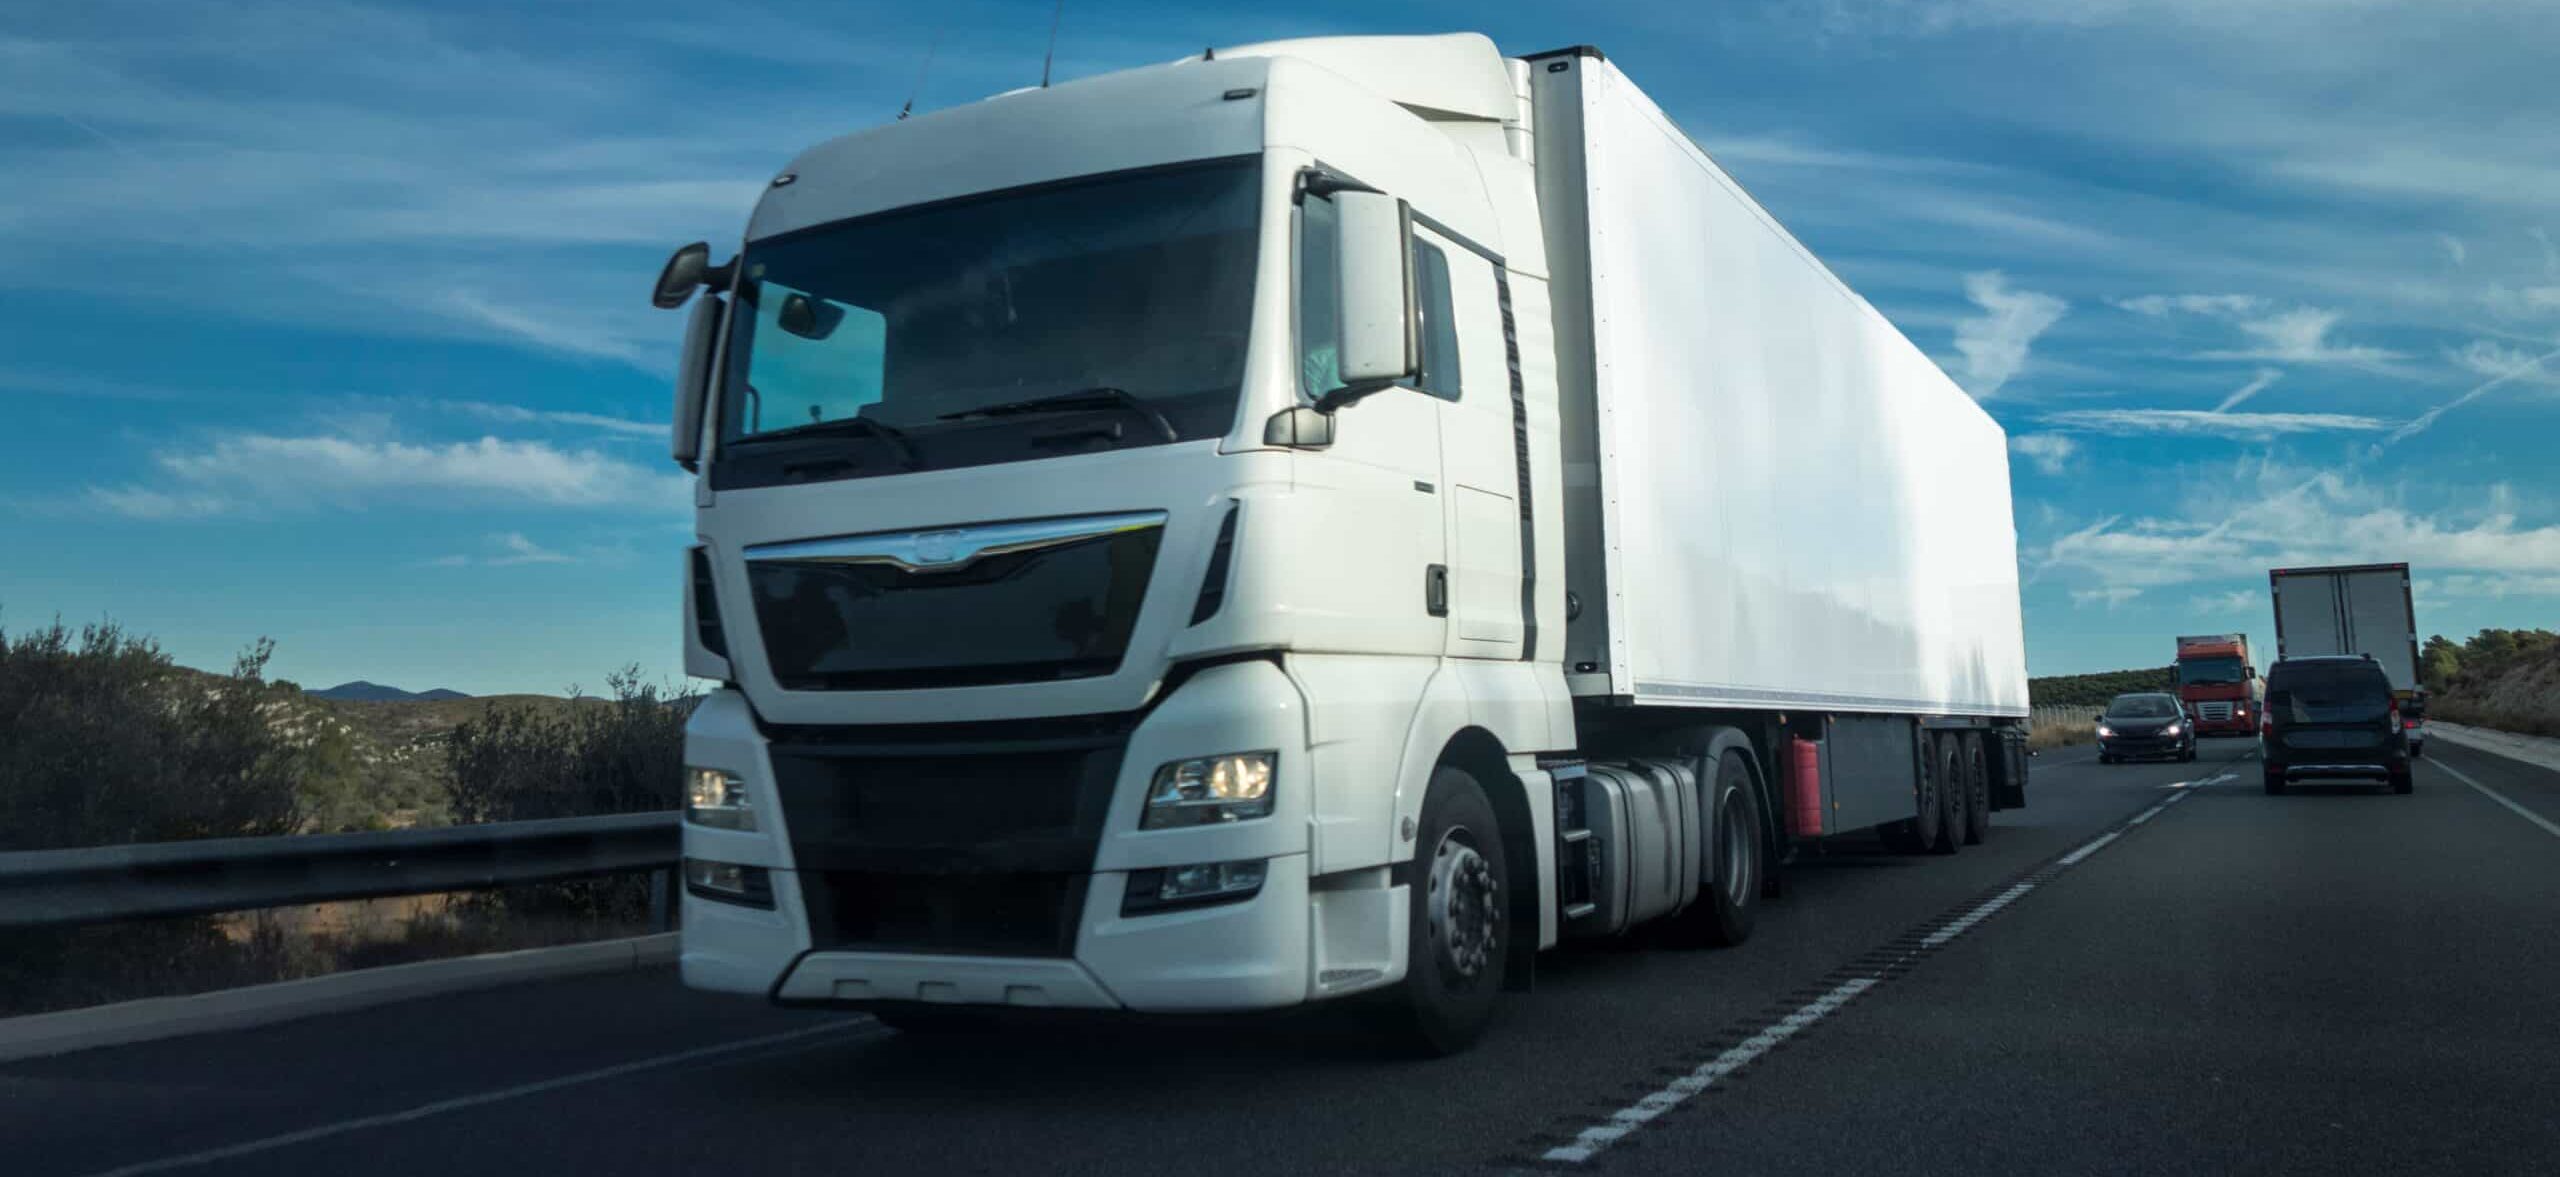 How to find the highest paying truck loads